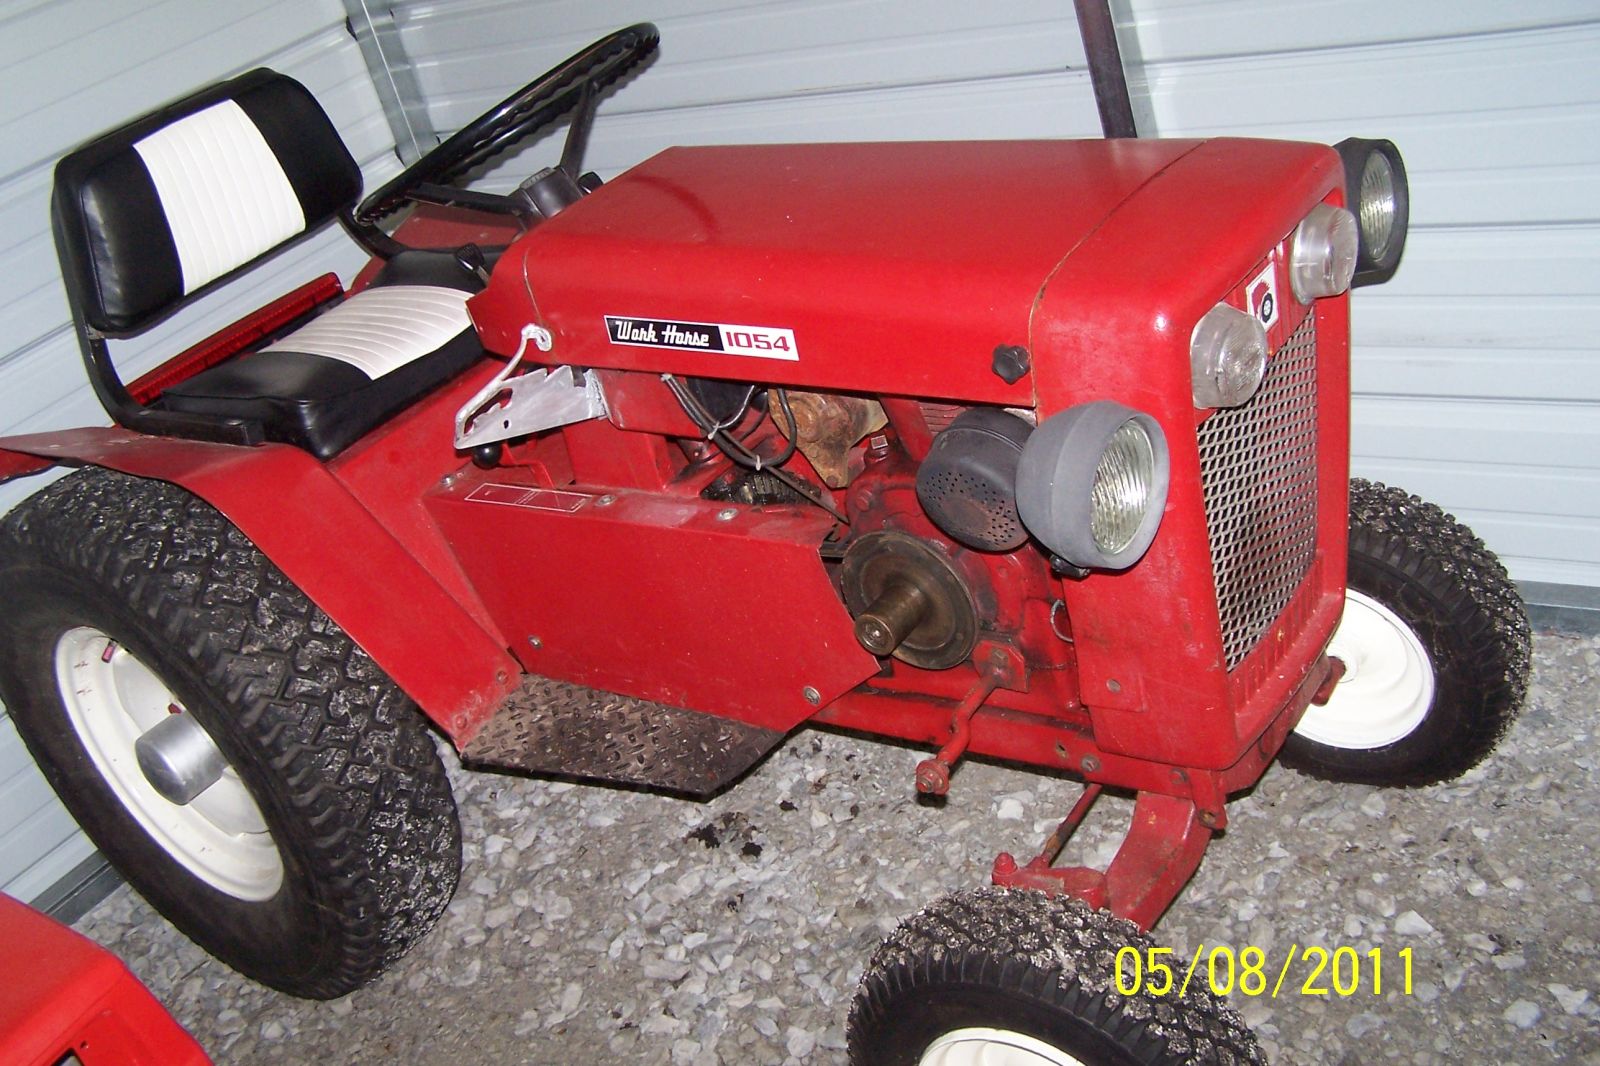 1964 Wheel Horse 1054 Tractor - 1955 - 1964 - RedSquare Wheel Horse ...